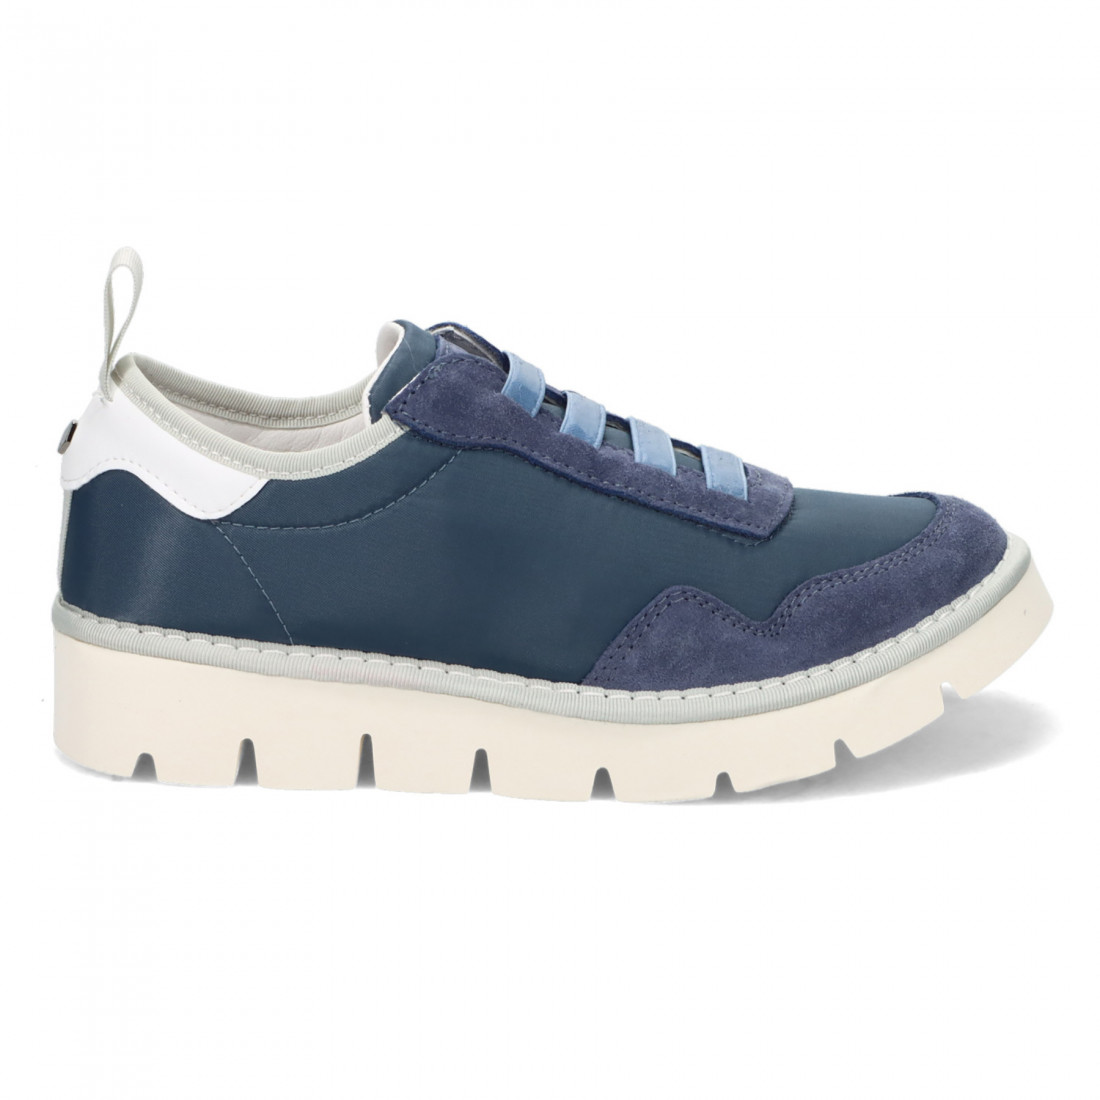 Sneakers donna Panchic Slip on P05 blu in camoscio